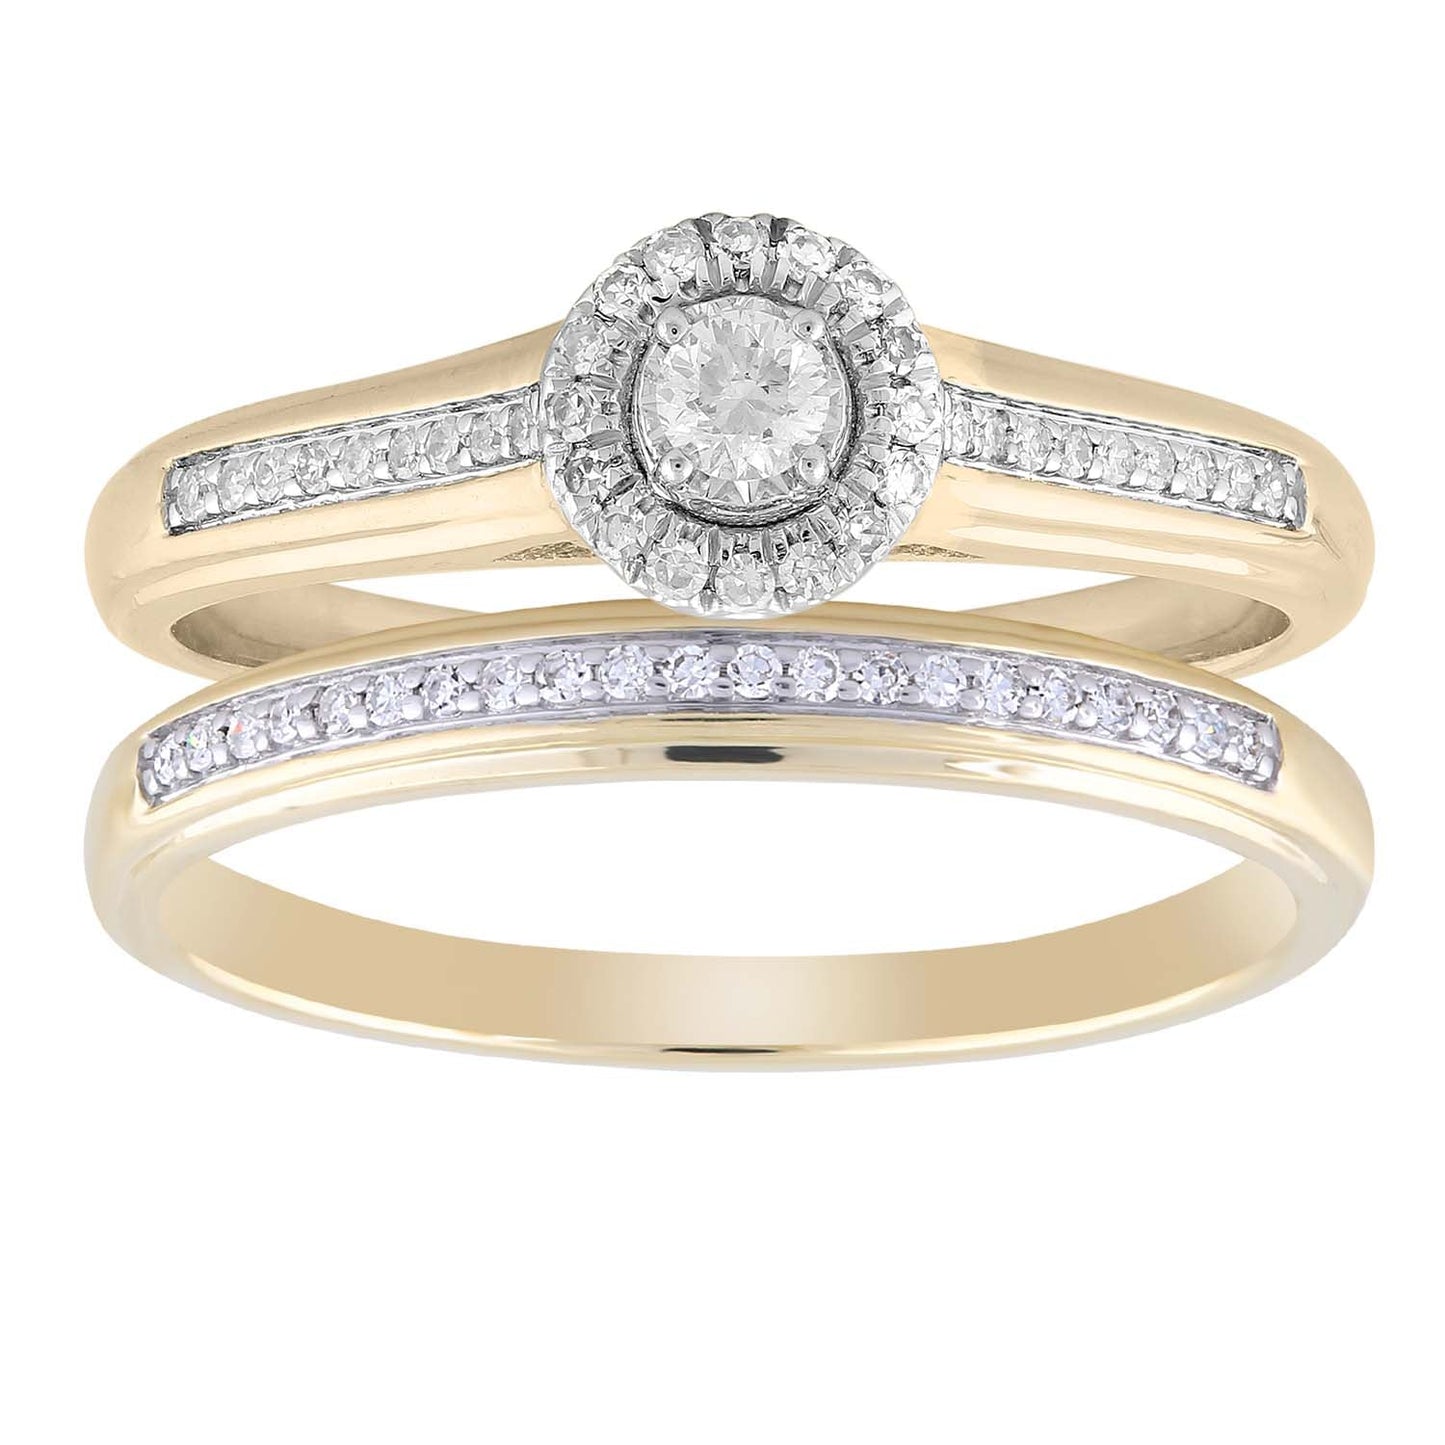 Ring Set with 0.25ct Diamond in 9K Yellow Gold